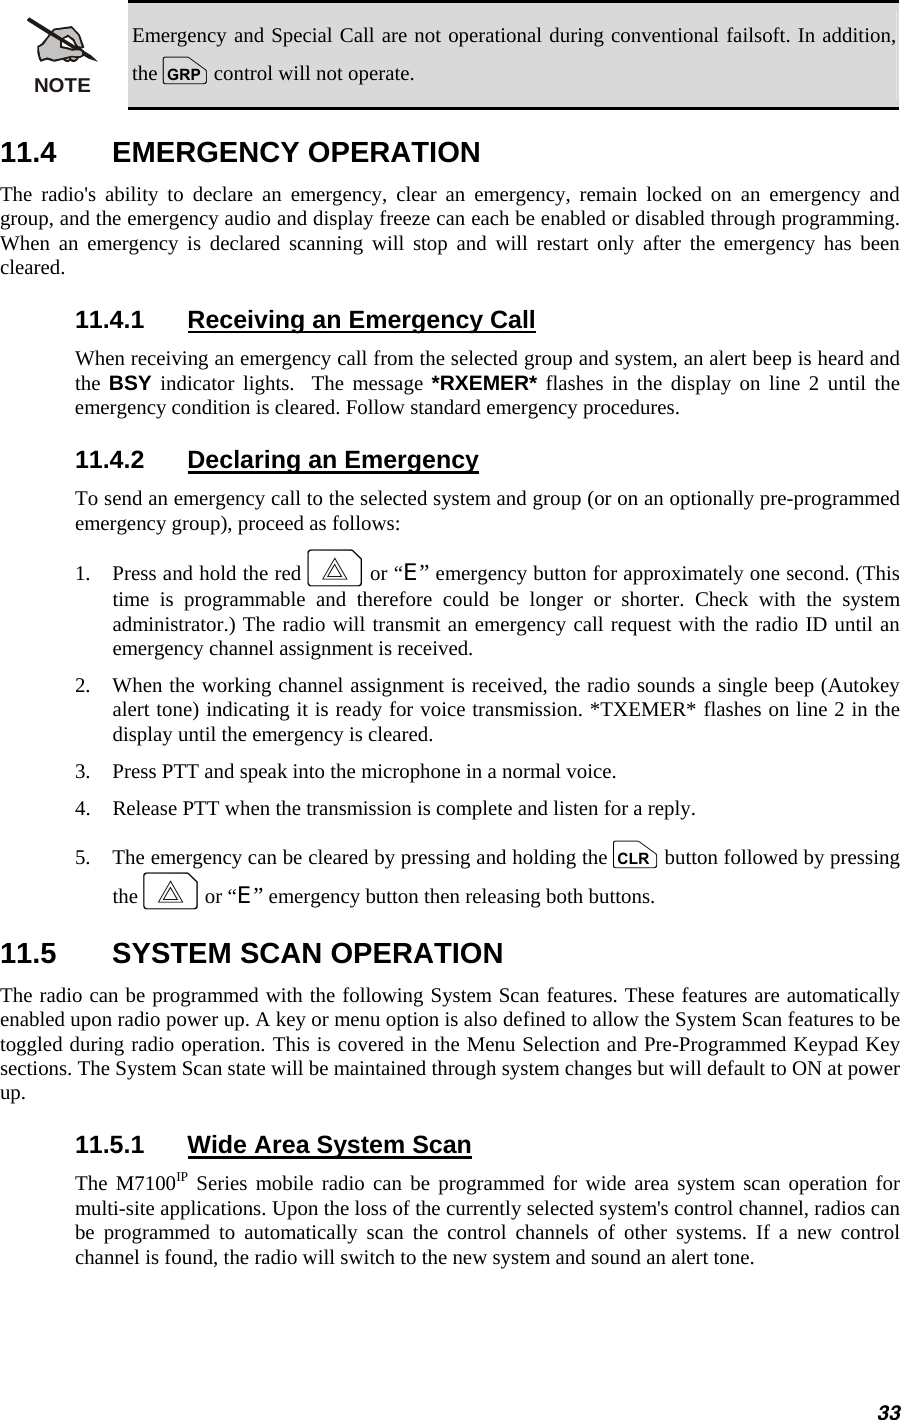 NOTE Emergency and Special Call are not operational during conventional failsoft. In addition, the g control will not operate. 11.4 EMERGENCY OPERATION The radio&apos;s ability to declare an emergency, clear an emergency, remain locked on an emergency and group, and the emergency audio and display freeze can each be enabled or disabled through programming. When an emergency is declared scanning will stop and will restart only after the emergency has been cleared. 11.4.1  Receiving an Emergency Call When receiving an emergency call from the selected group and system, an alert beep is heard and the  BSY indicator lights.  The message *RXEMER* flashes in the display on line 2 until the emergency condition is cleared. Follow standard emergency procedures. 11.4.2  Declaring an Emergency To send an emergency call to the selected system and group (or on an optionally pre-programmed emergency group), proceed as follows: 1.   Press and hold the red E or “E” emergency button for approximately one second. (This time is programmable and therefore could be longer or shorter. Check with the system administrator.) The radio will transmit an emergency call request with the radio ID until an emergency channel assignment is received. 2.   When the working channel assignment is received, the radio sounds a single beep (Autokey alert tone) indicating it is ready for voice transmission. *TXEMER* flashes on line 2 in the display until the emergency is cleared. 3.   Press PTT and speak into the microphone in a normal voice. 4.   Release PTT when the transmission is complete and listen for a reply. 5.   The emergency can be cleared by pressing and holding the c button followed by pressing the E or “E” emergency button then releasing both buttons. 11.5  SYSTEM SCAN OPERATION The radio can be programmed with the following System Scan features. These features are automatically enabled upon radio power up. A key or menu option is also defined to allow the System Scan features to be toggled during radio operation. This is covered in the Menu Selection and Pre-Programmed Keypad Key sections. The System Scan state will be maintained through system changes but will default to ON at power up. 11.5.1  Wide Area System Scan The M7100IP Series mobile radio can be programmed for wide area system scan operation for multi-site applications. Upon the loss of the currently selected system&apos;s control channel, radios can be programmed to automatically scan the control channels of other systems. If a new control channel is found, the radio will switch to the new system and sound an alert tone. 33 